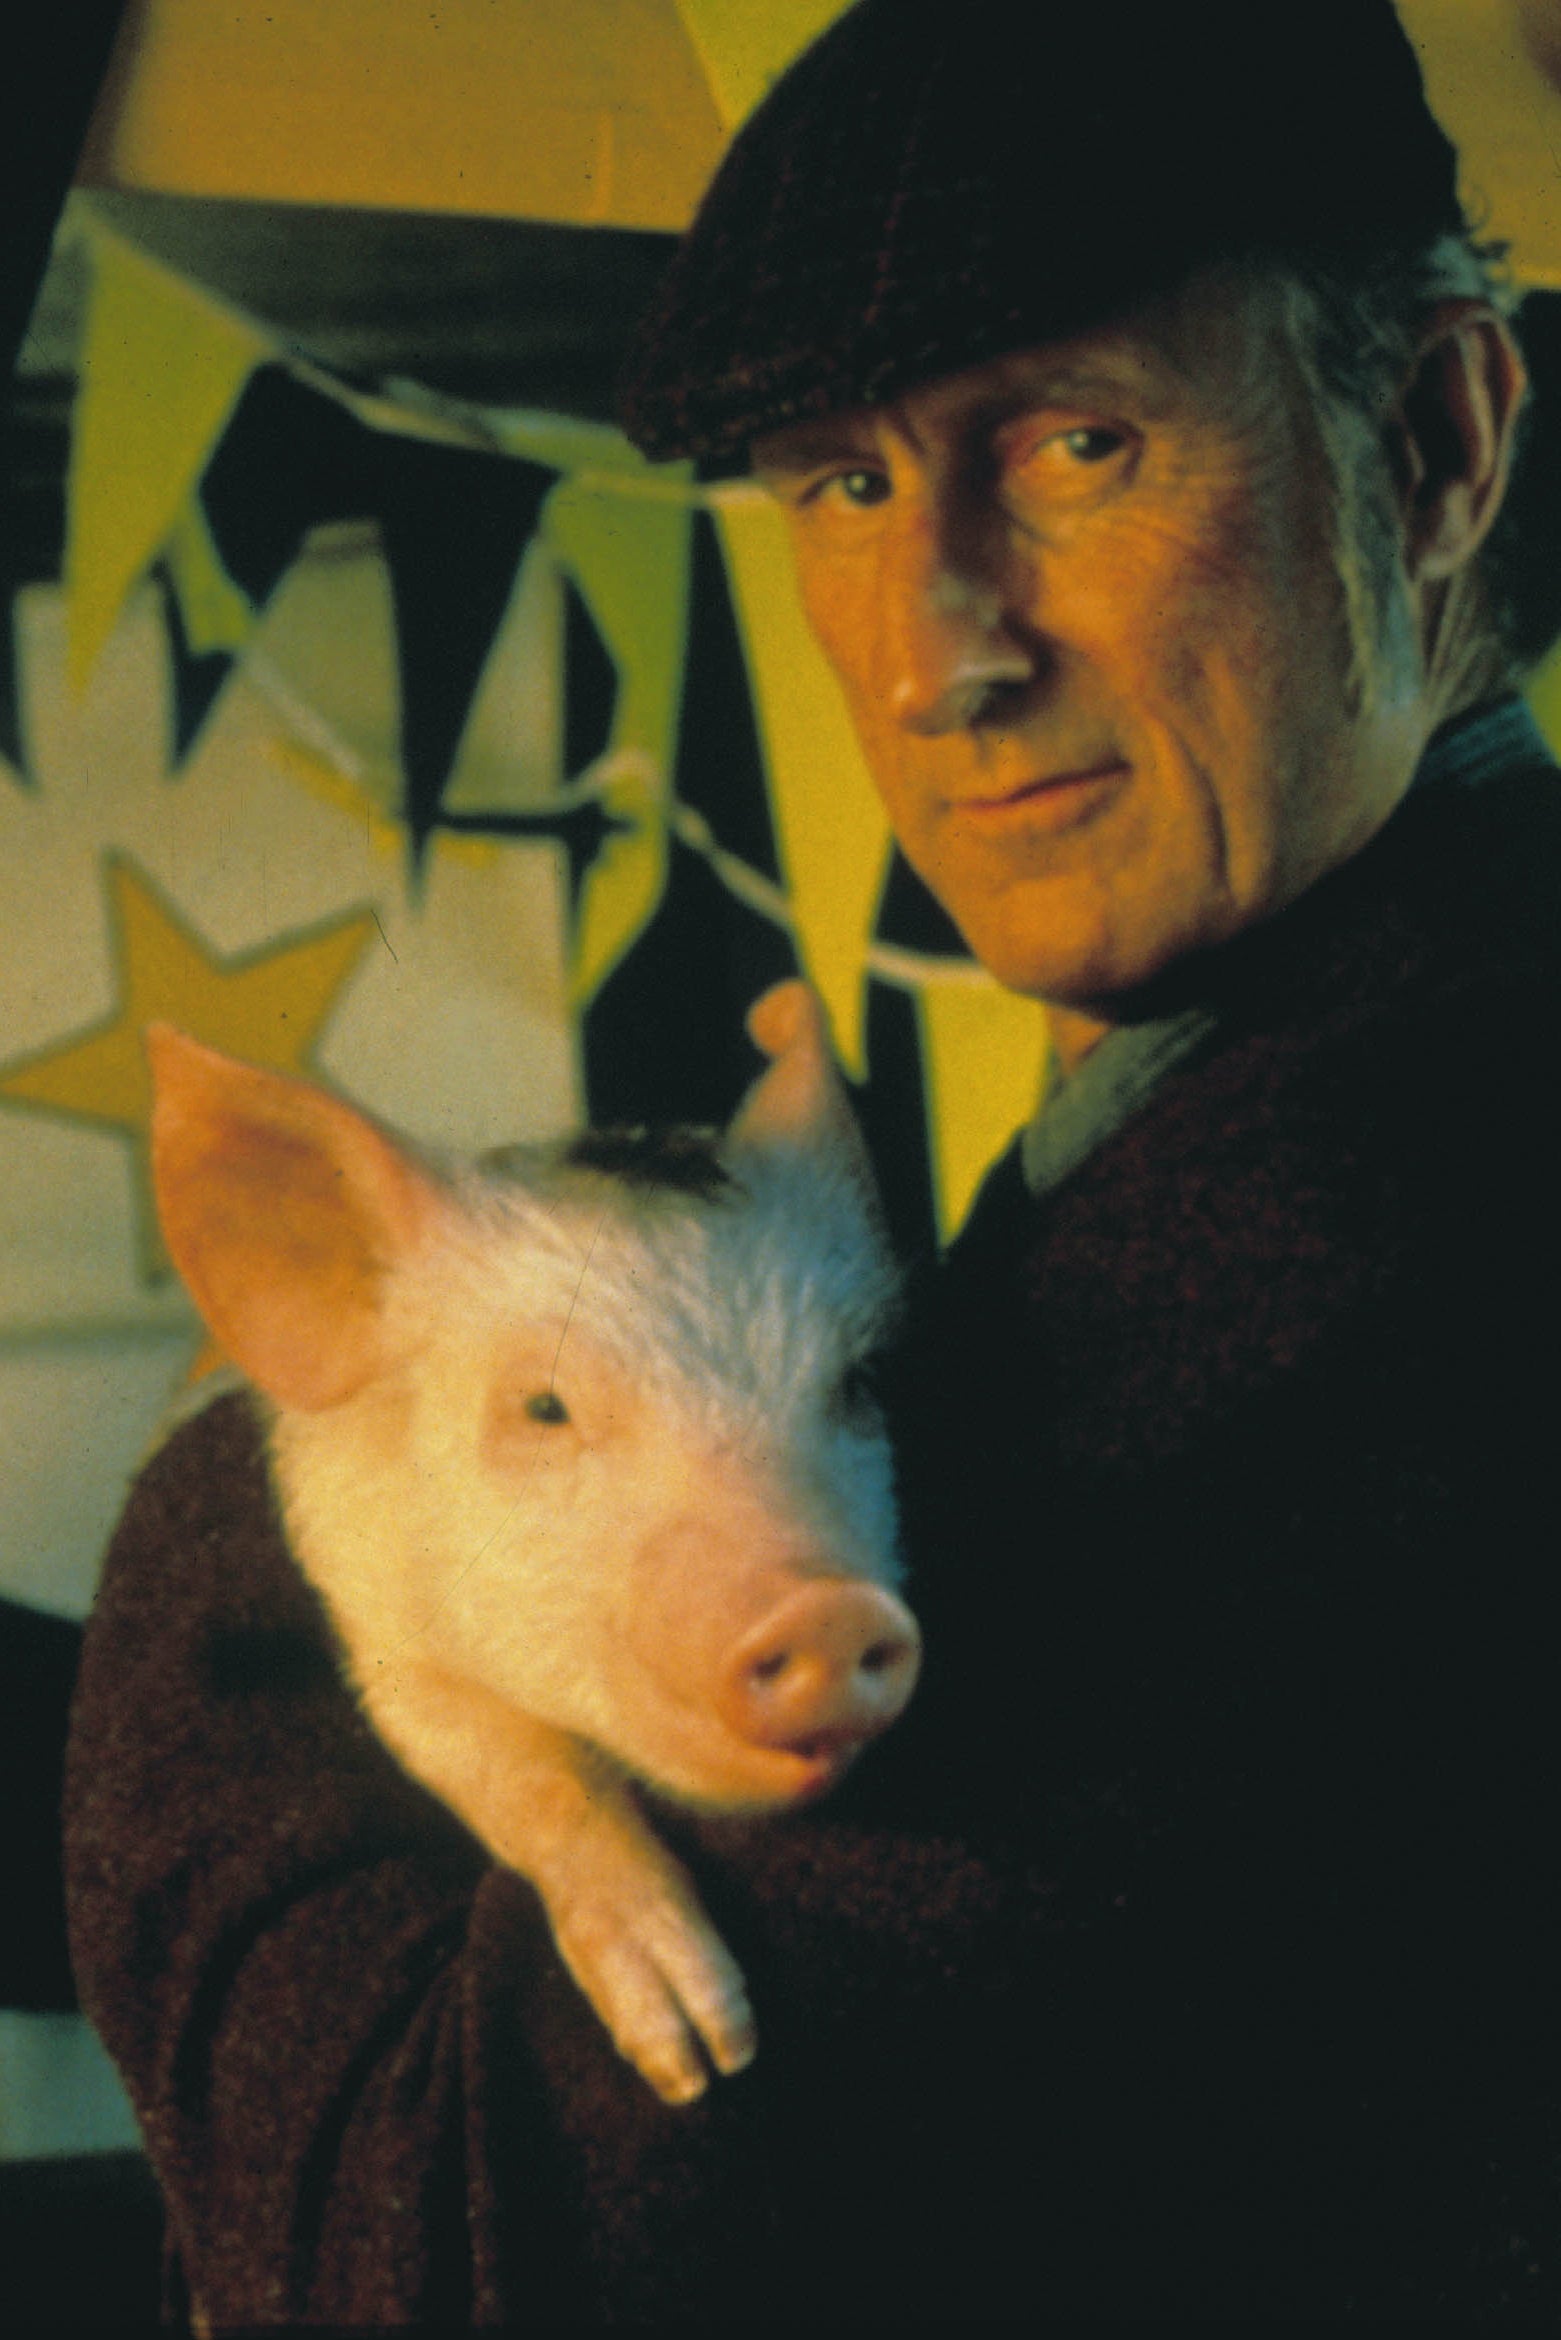 James Cromwell (with pig) in ‘Babe'